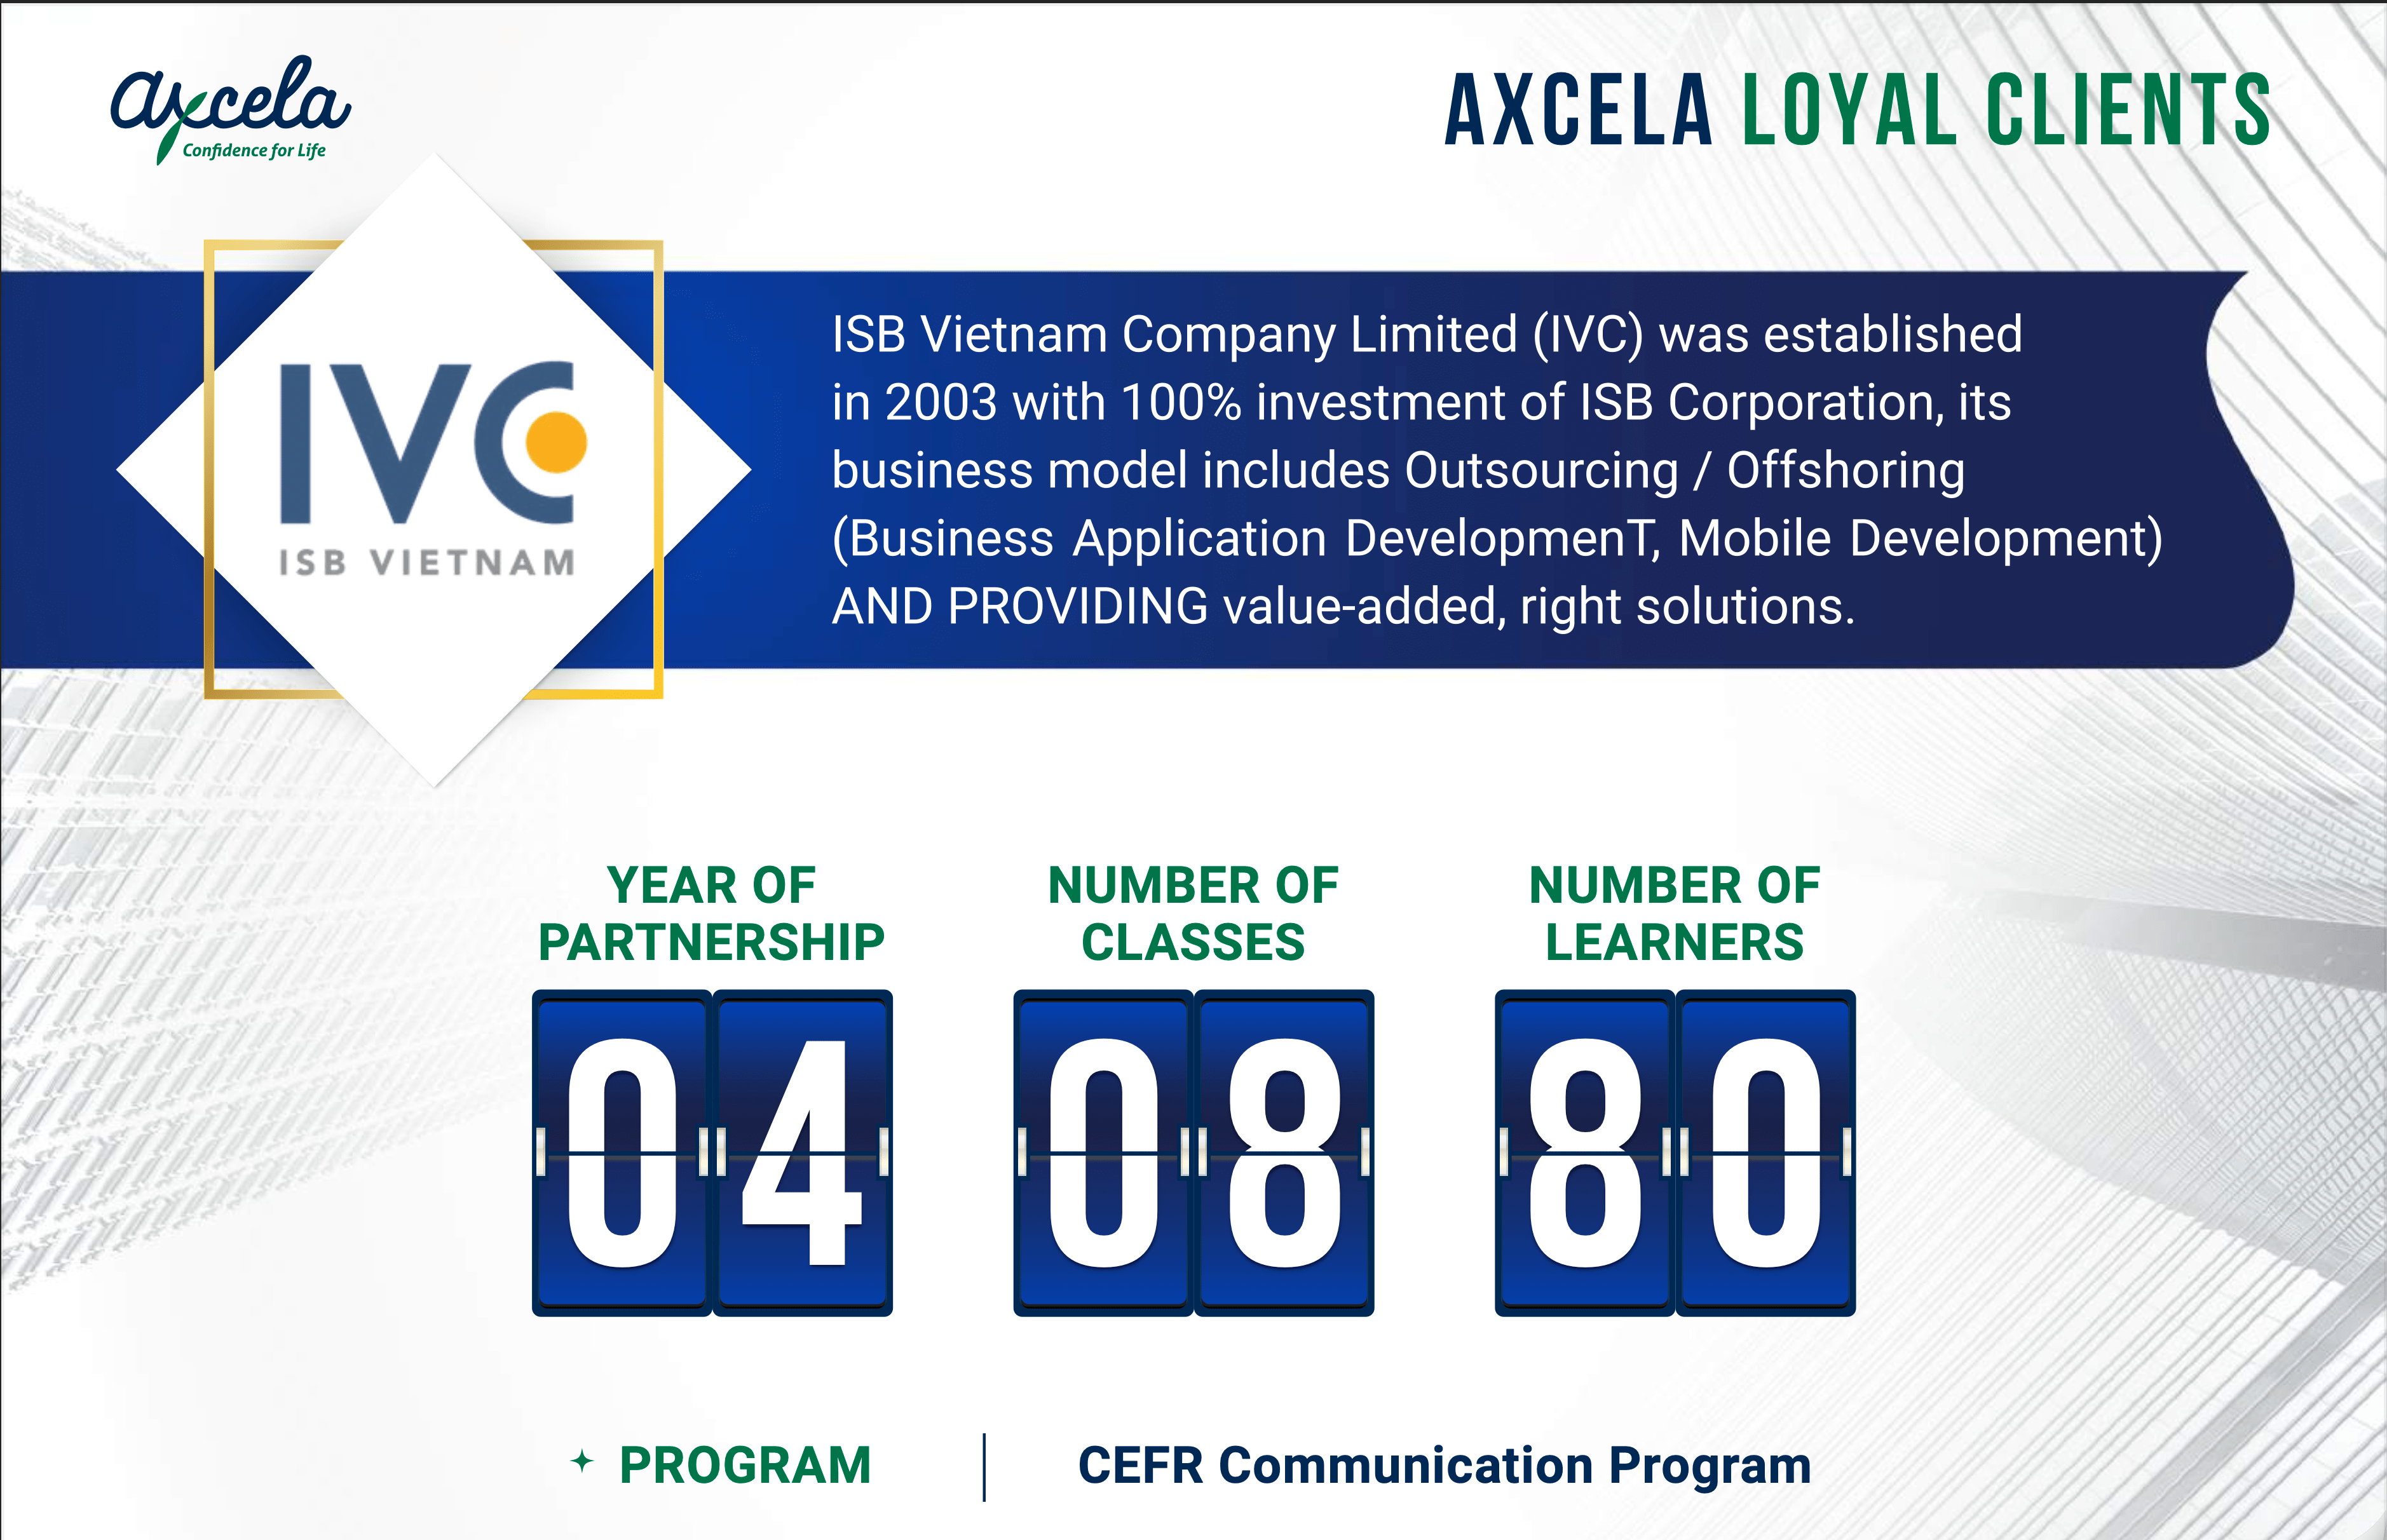 Continuous partner of Axcela for 04 years